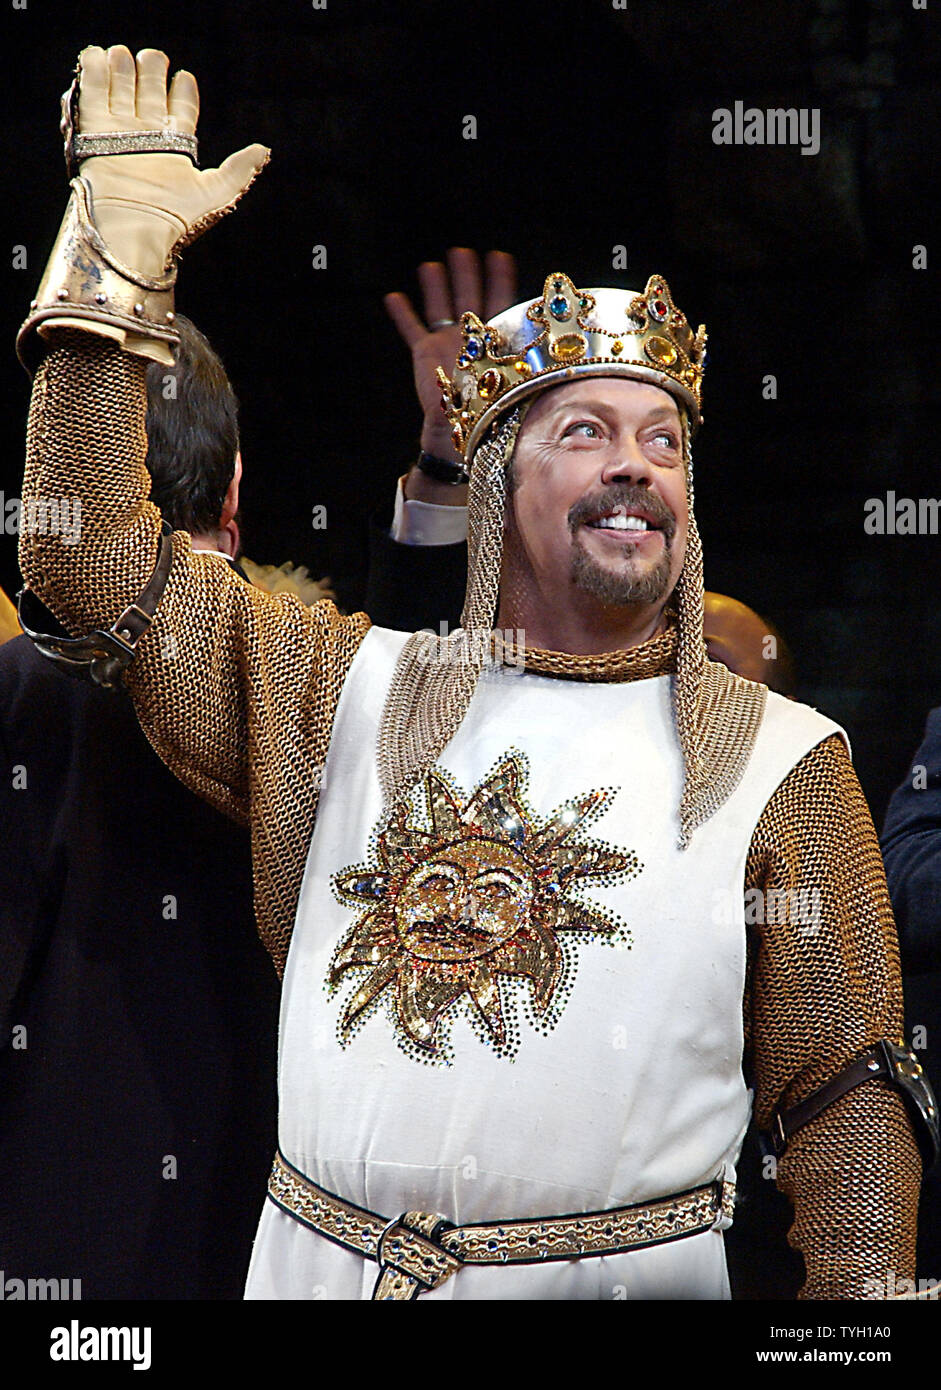 Actor Tim Curry who plays King Arthur takes his opening night curtain call  bows on March 17, 2005 in the Monty Python Broadway musical "Spamalot"  directed by Mike Nichols. (UPI Photo/Ezio Petersen